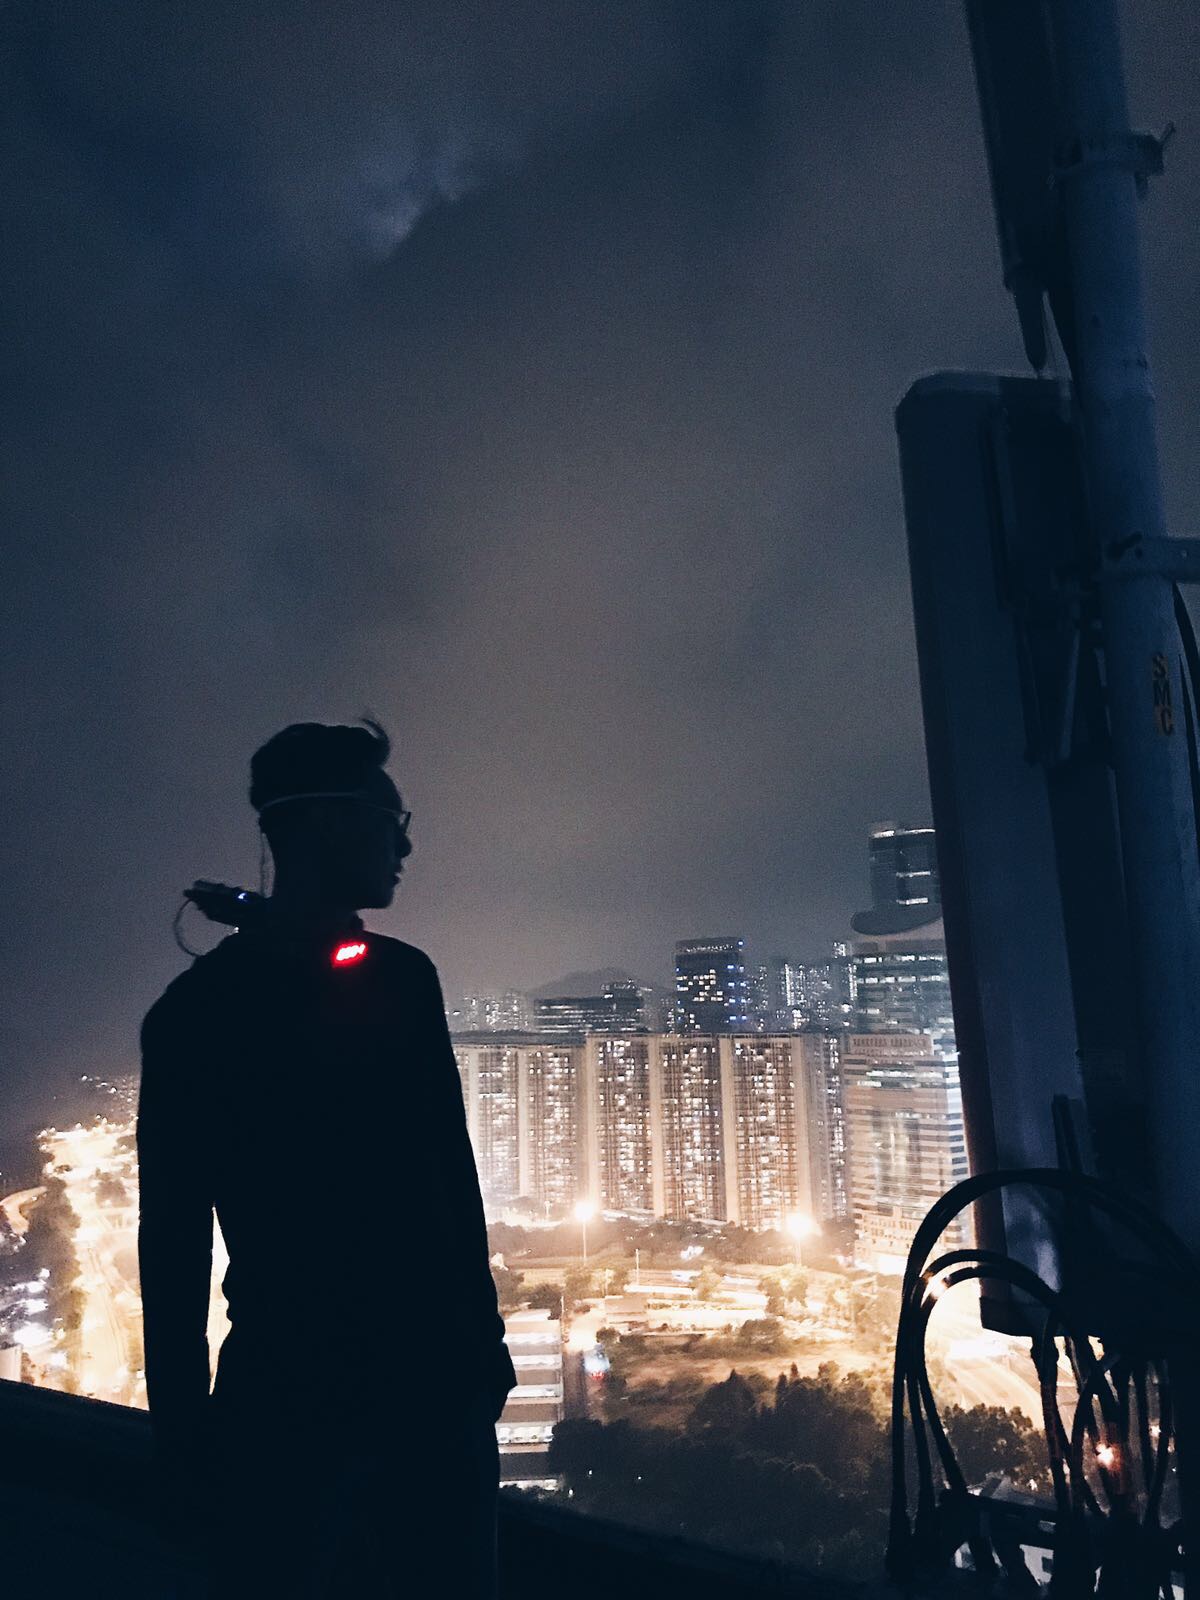 The image depicts a silhouette of a person standing on a high vantage point overlooking a city at night. The person appears to be wearing a headlamp or some device with a red light on their back. The cityscape below is illuminated with streetlights and lights from numerous tall buildings. The sky is overcast with clouds, adding to the dramatic atmosphere of the scene. In the foreground, there is a large metal structure, possibly part of a communications tower or similar equipment.